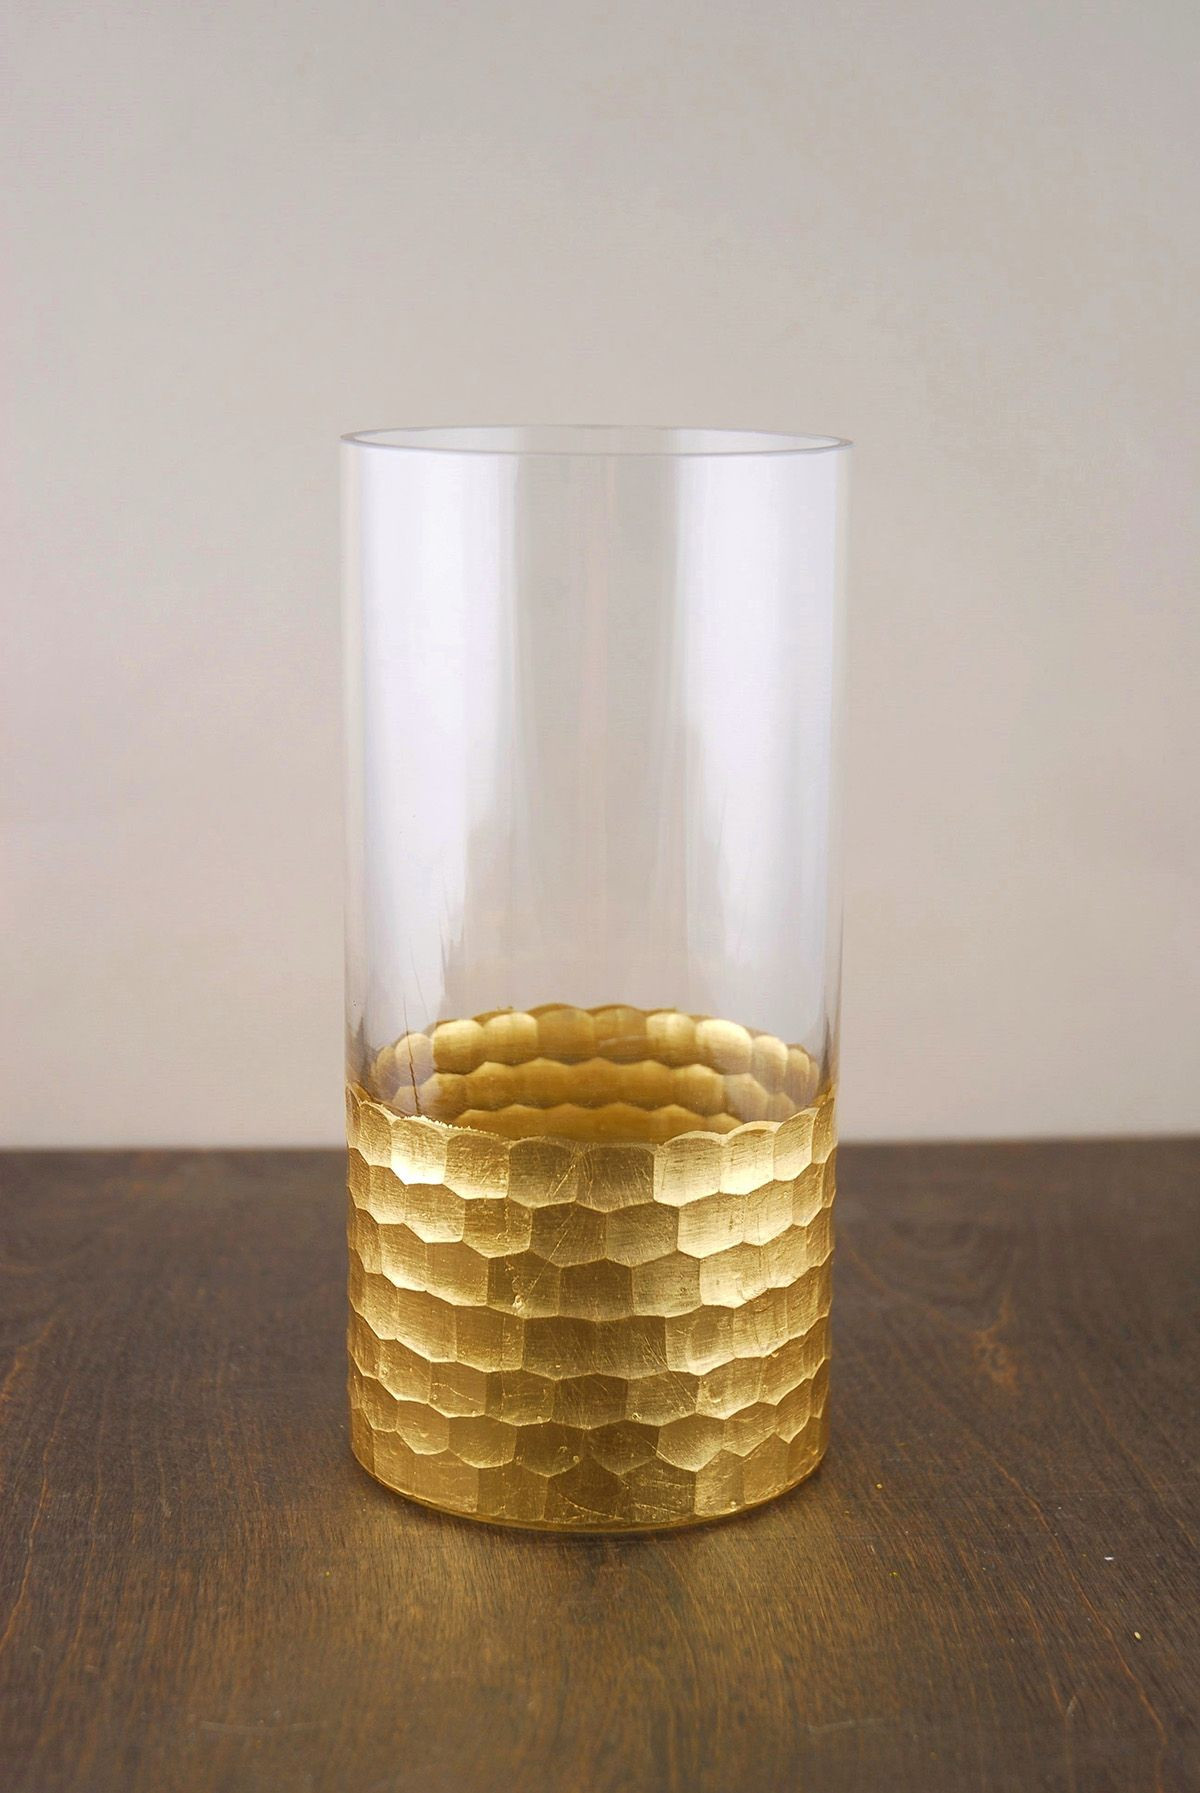 24 Perfect 12 Glass Cylinder Vase 2024 free download 12 glass cylinder vase of gold cylinder vases images gold honey b cylinder vase 8 x 4 regarding gold cylinder vases images gold honey b cylinder vase 8 x 4